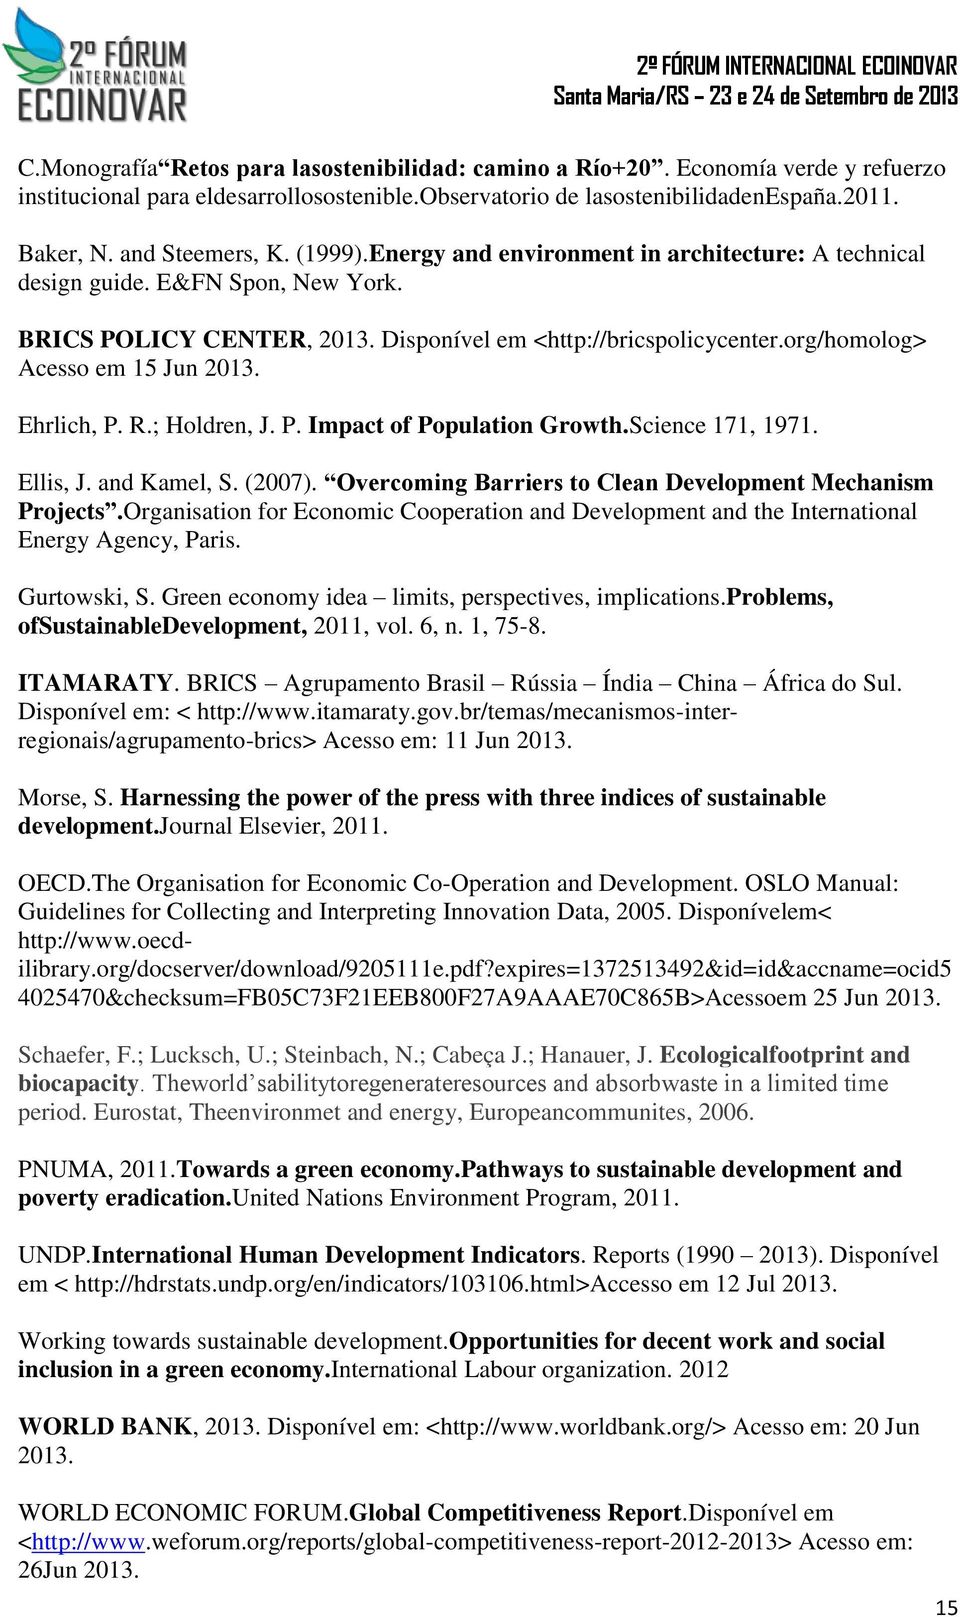 Ehrlich, P. R.; Holdren, J. P. Impact of Population Growth.Science 171, 1971. Ellis, J. and Kamel, S. (2007). Overcoming Barriers to Clean Development Mechanism Projects.